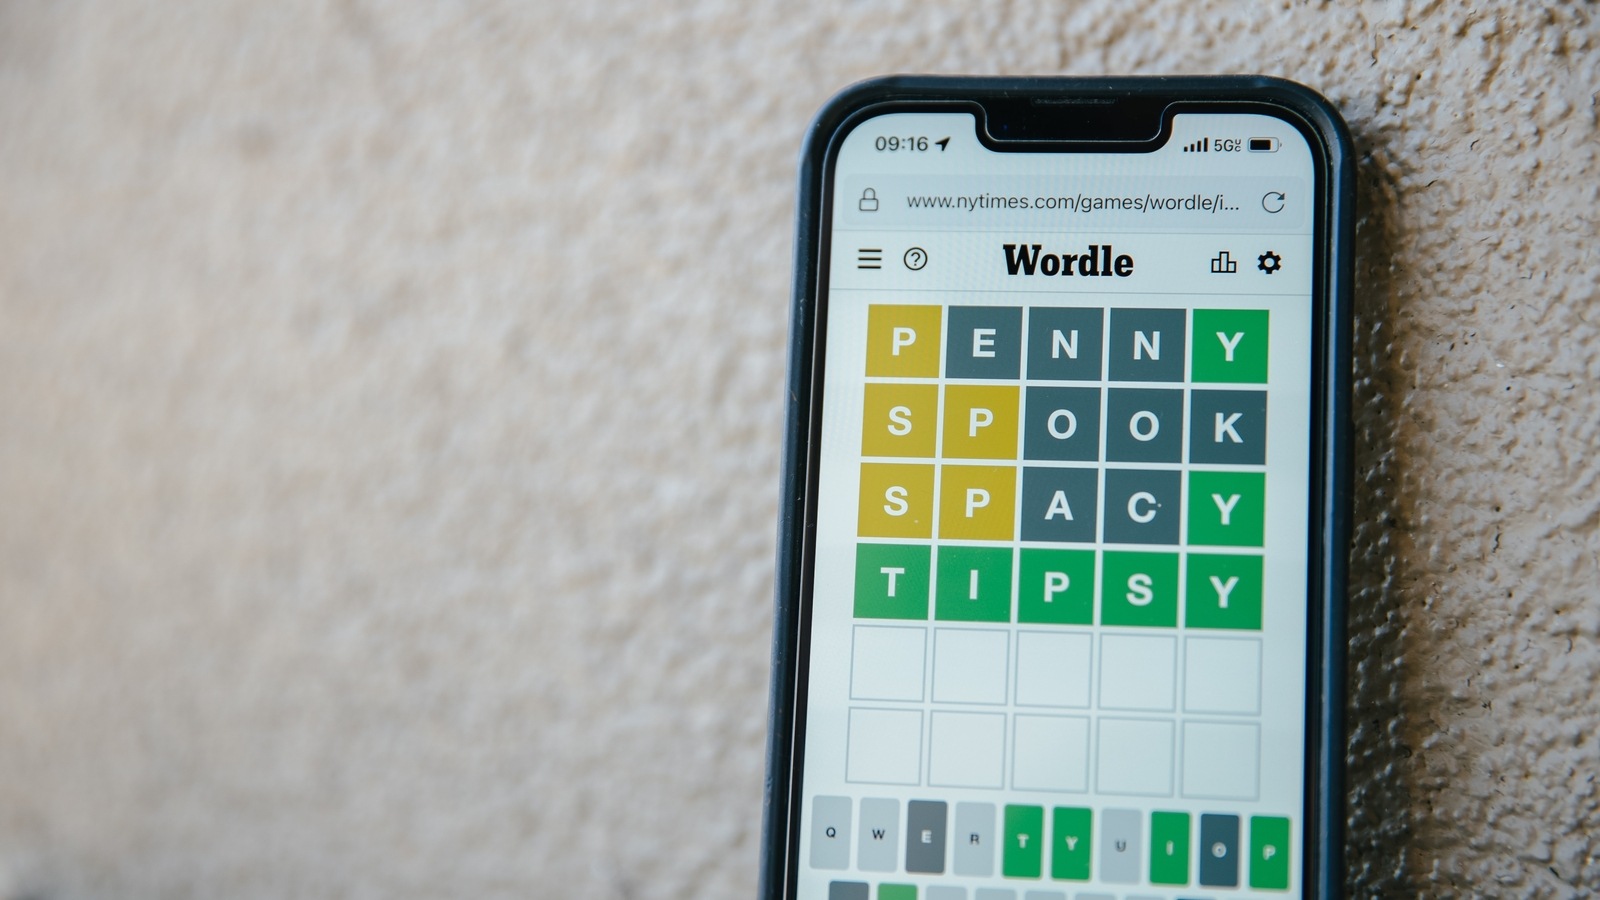 Puzzmo is the daily puzzle hub Wordle fans have dreamed of